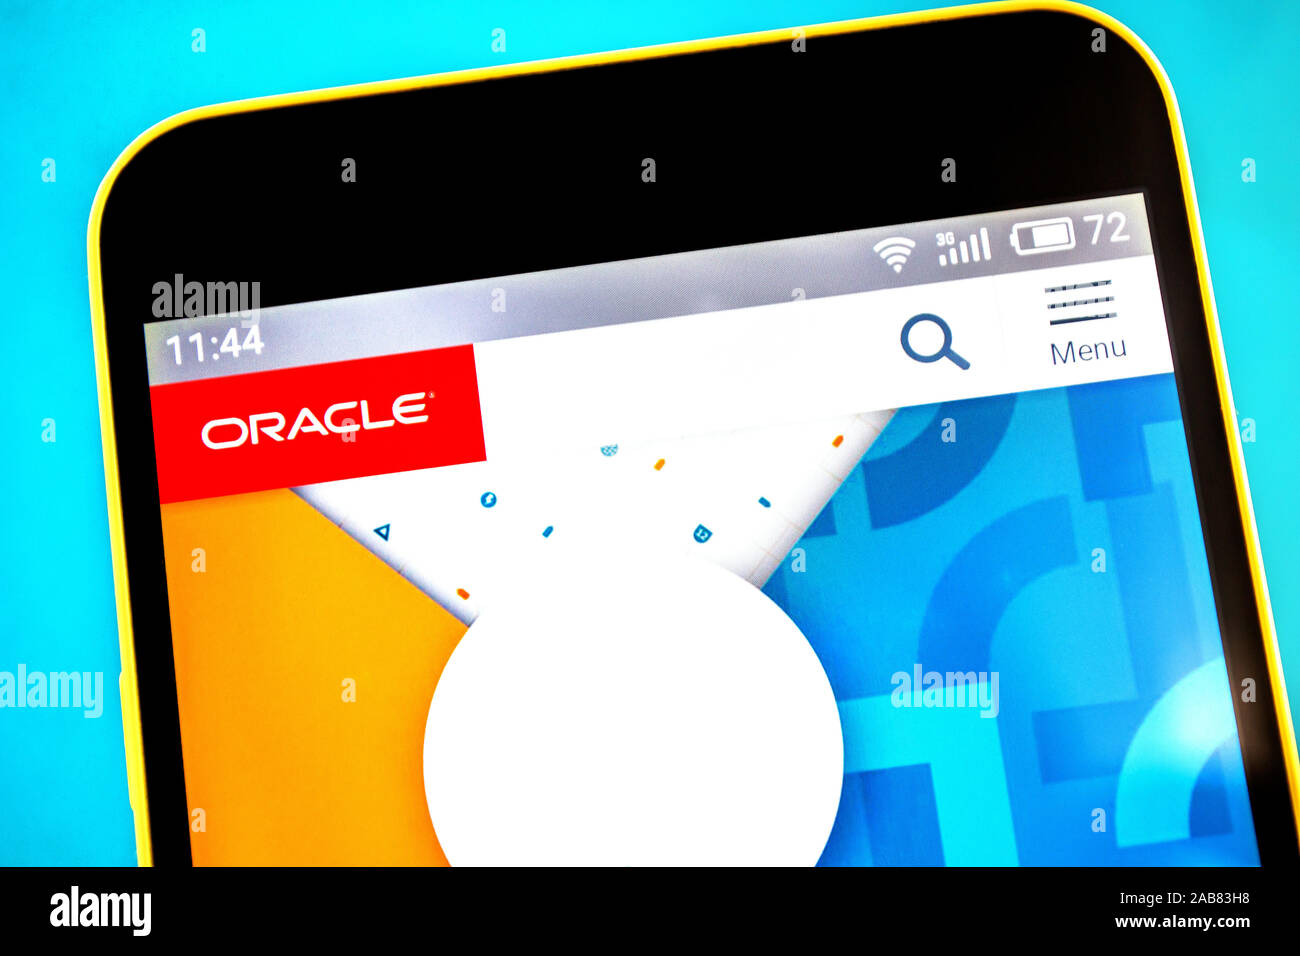 Berdyansk, Ukraine - April 25, 2019: Illustrative Editorial of Oracle website homepage. Oracle logo visible on the phone screen. Stock Photo